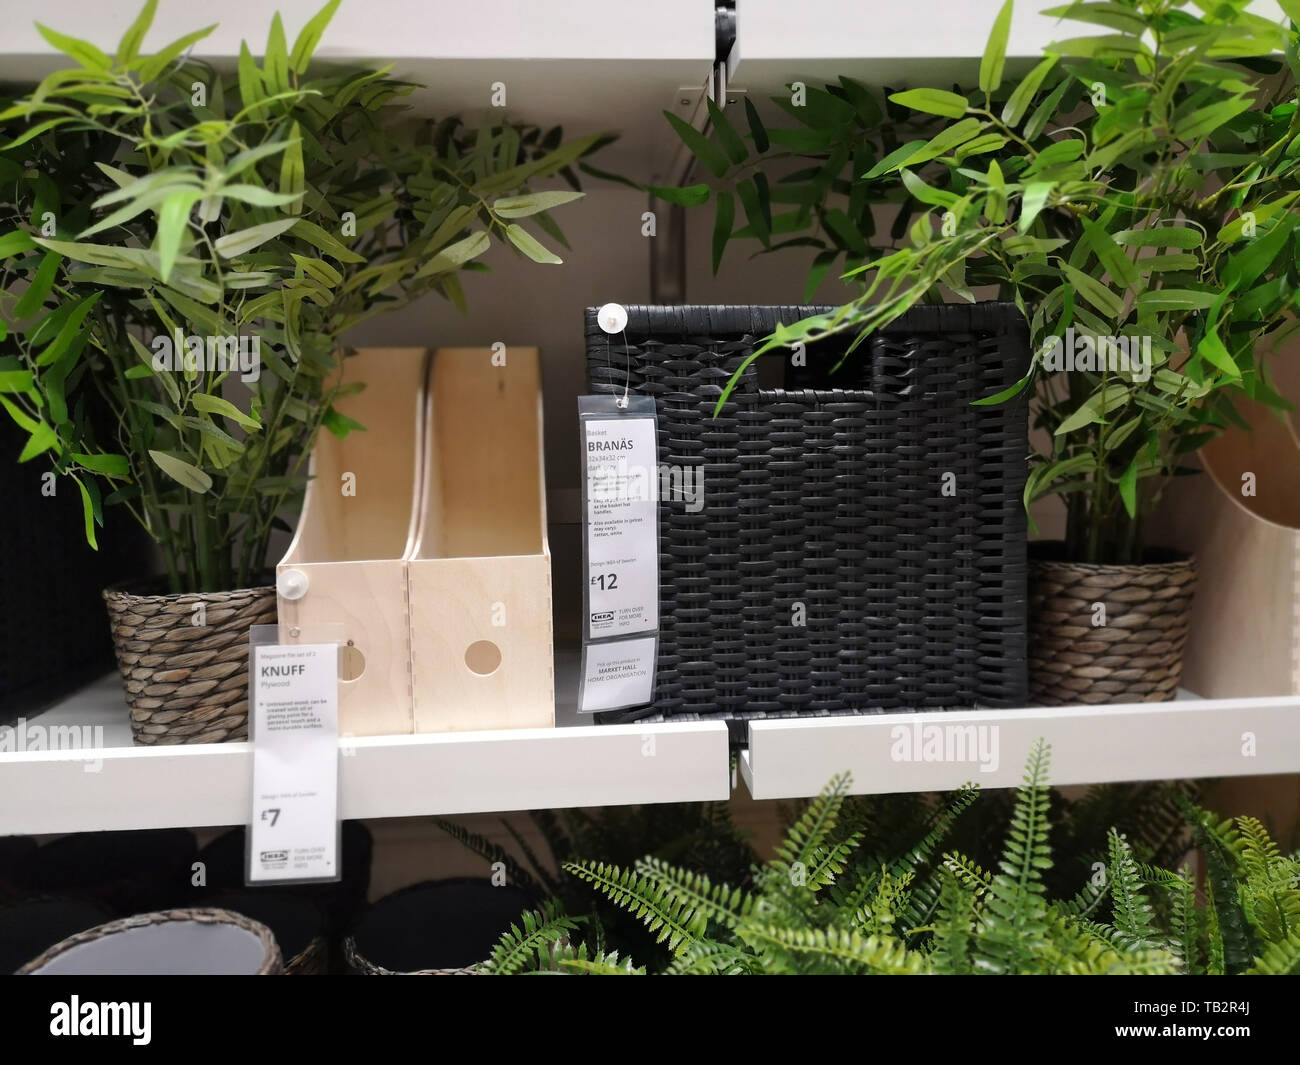 at Ikea in Coventry, UK, on May 29, 2019. Stock Photo